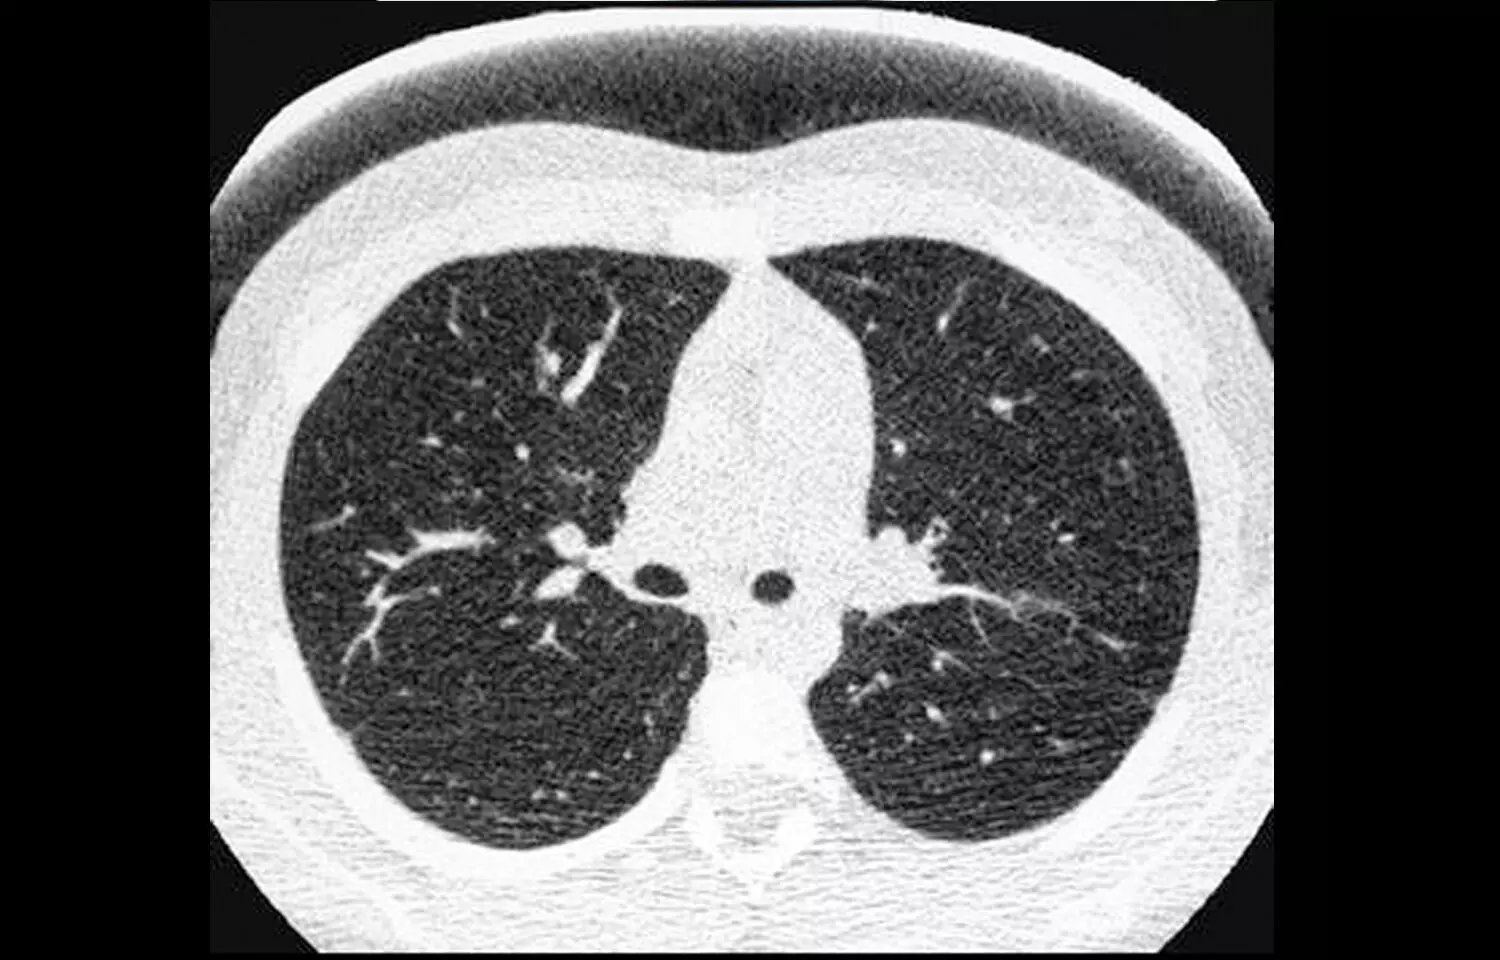 Low dose CT screening for lung cancer reduces mortality, confirms meta - analysis